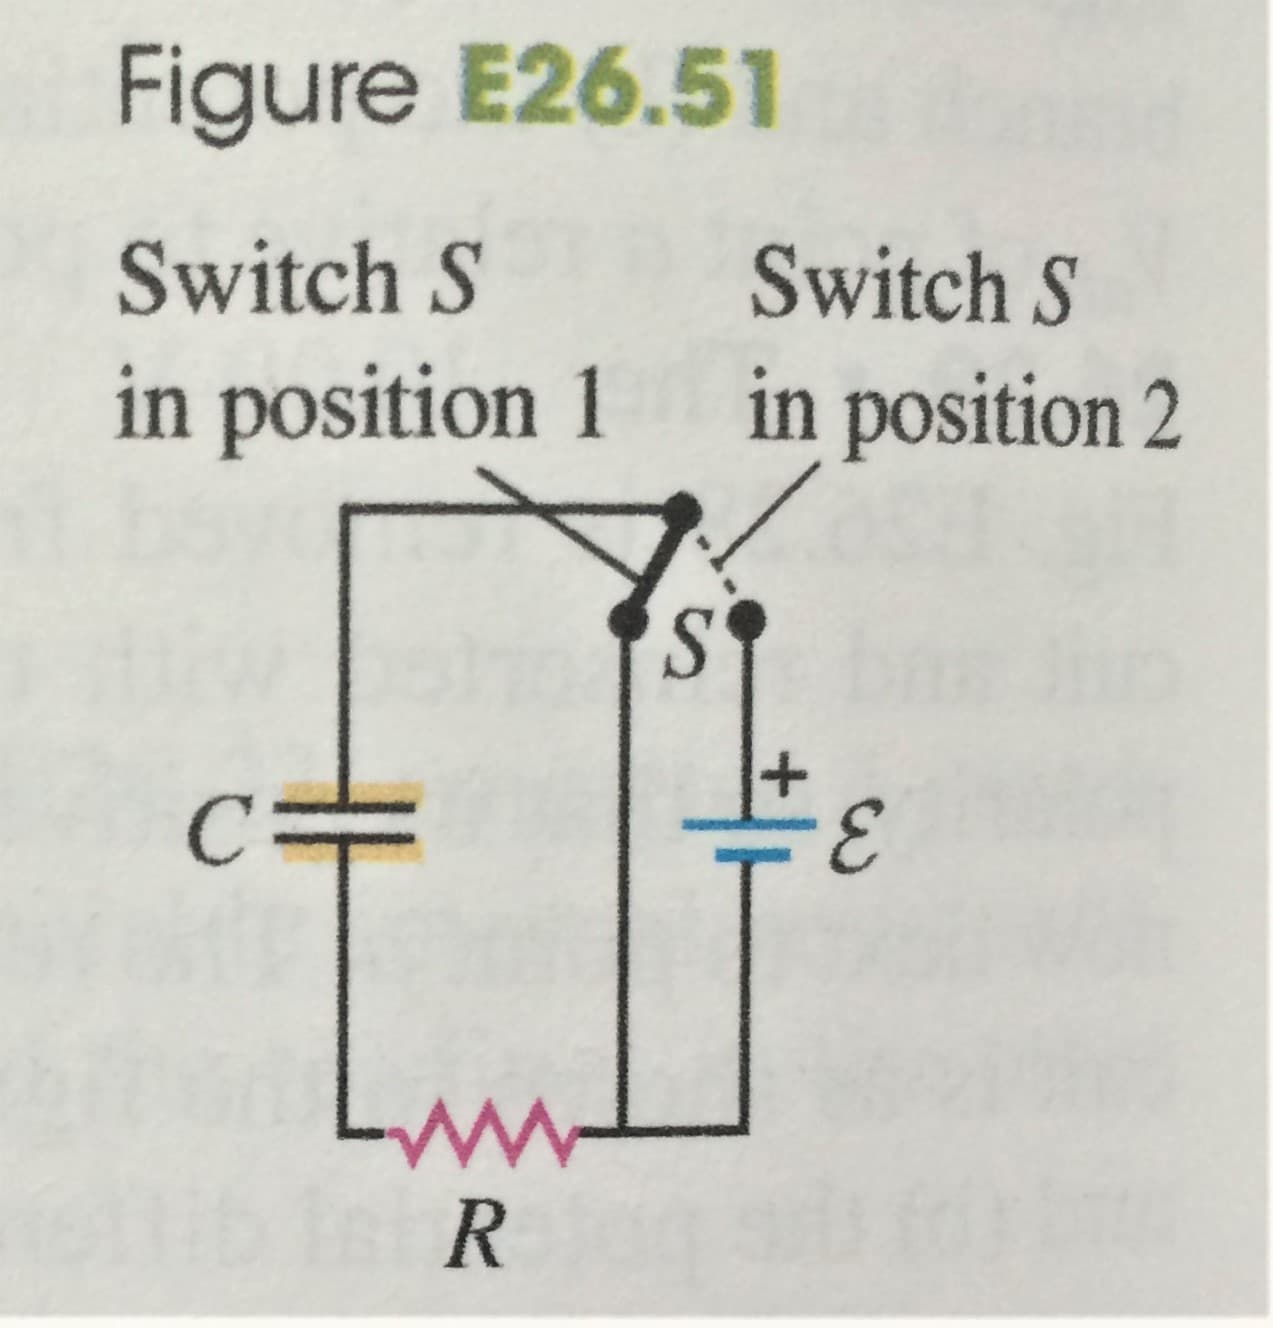 Figure E26.51
Switch S
Switch S
in position 1
in position 2
S
C
R
